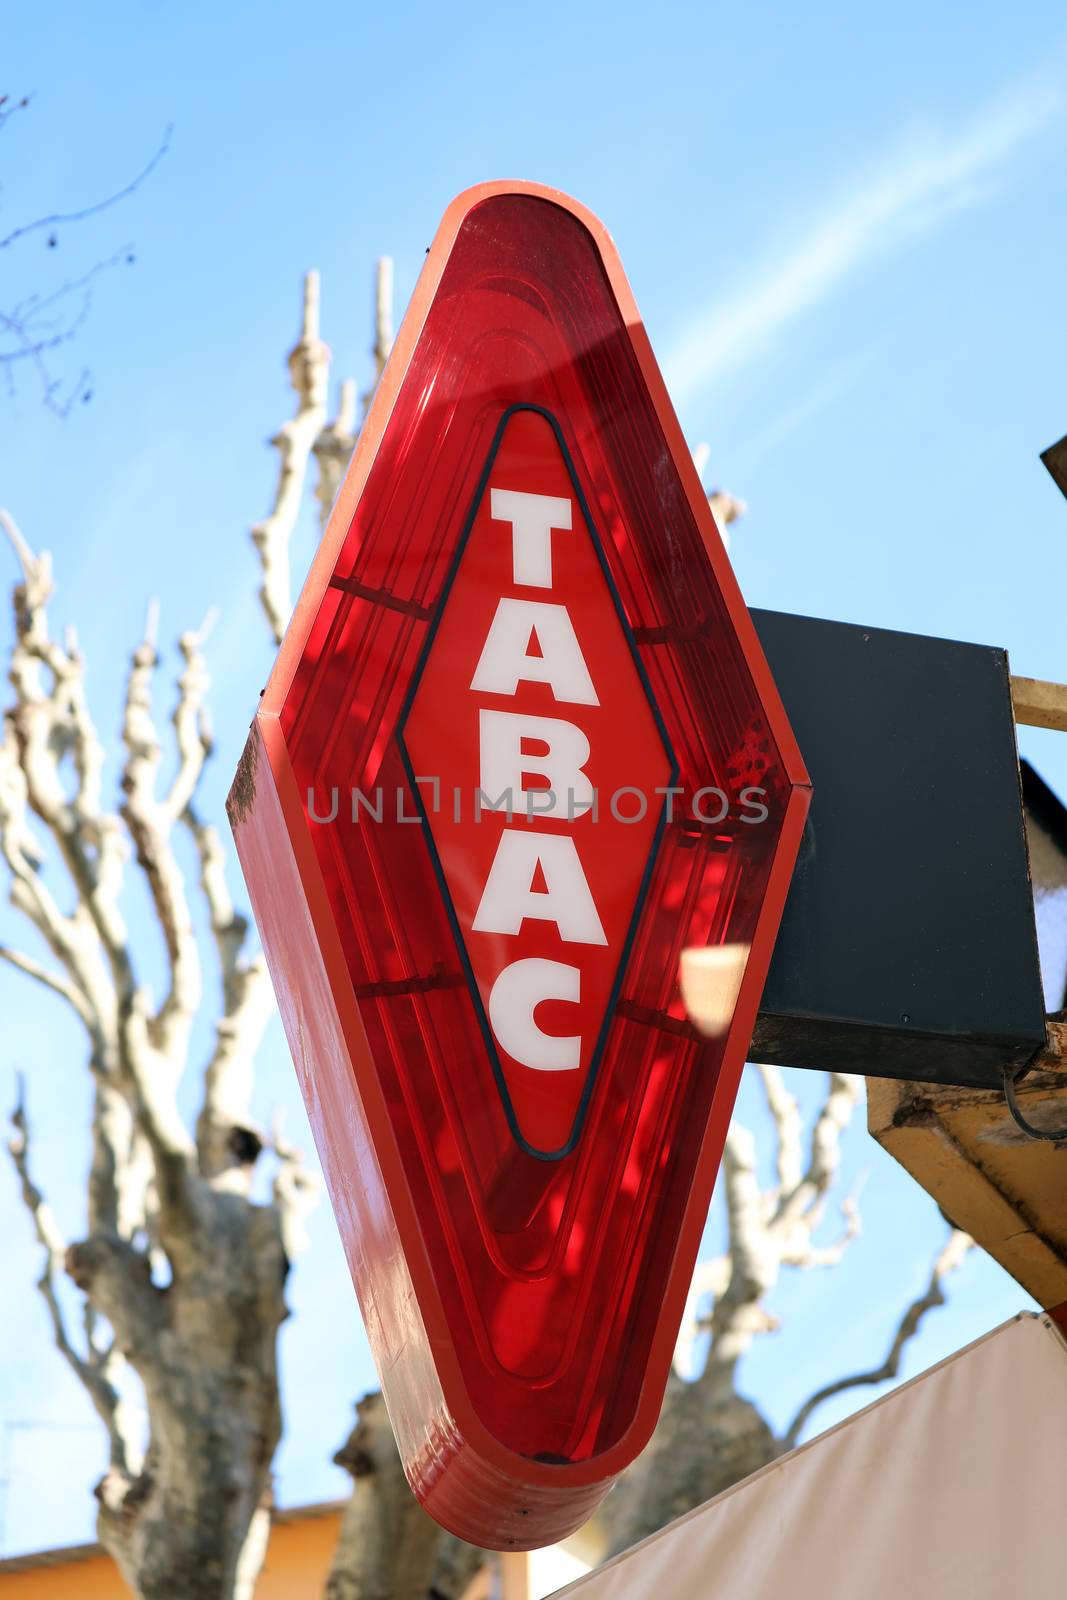 Tabac Sign in France Closse Up by bensib